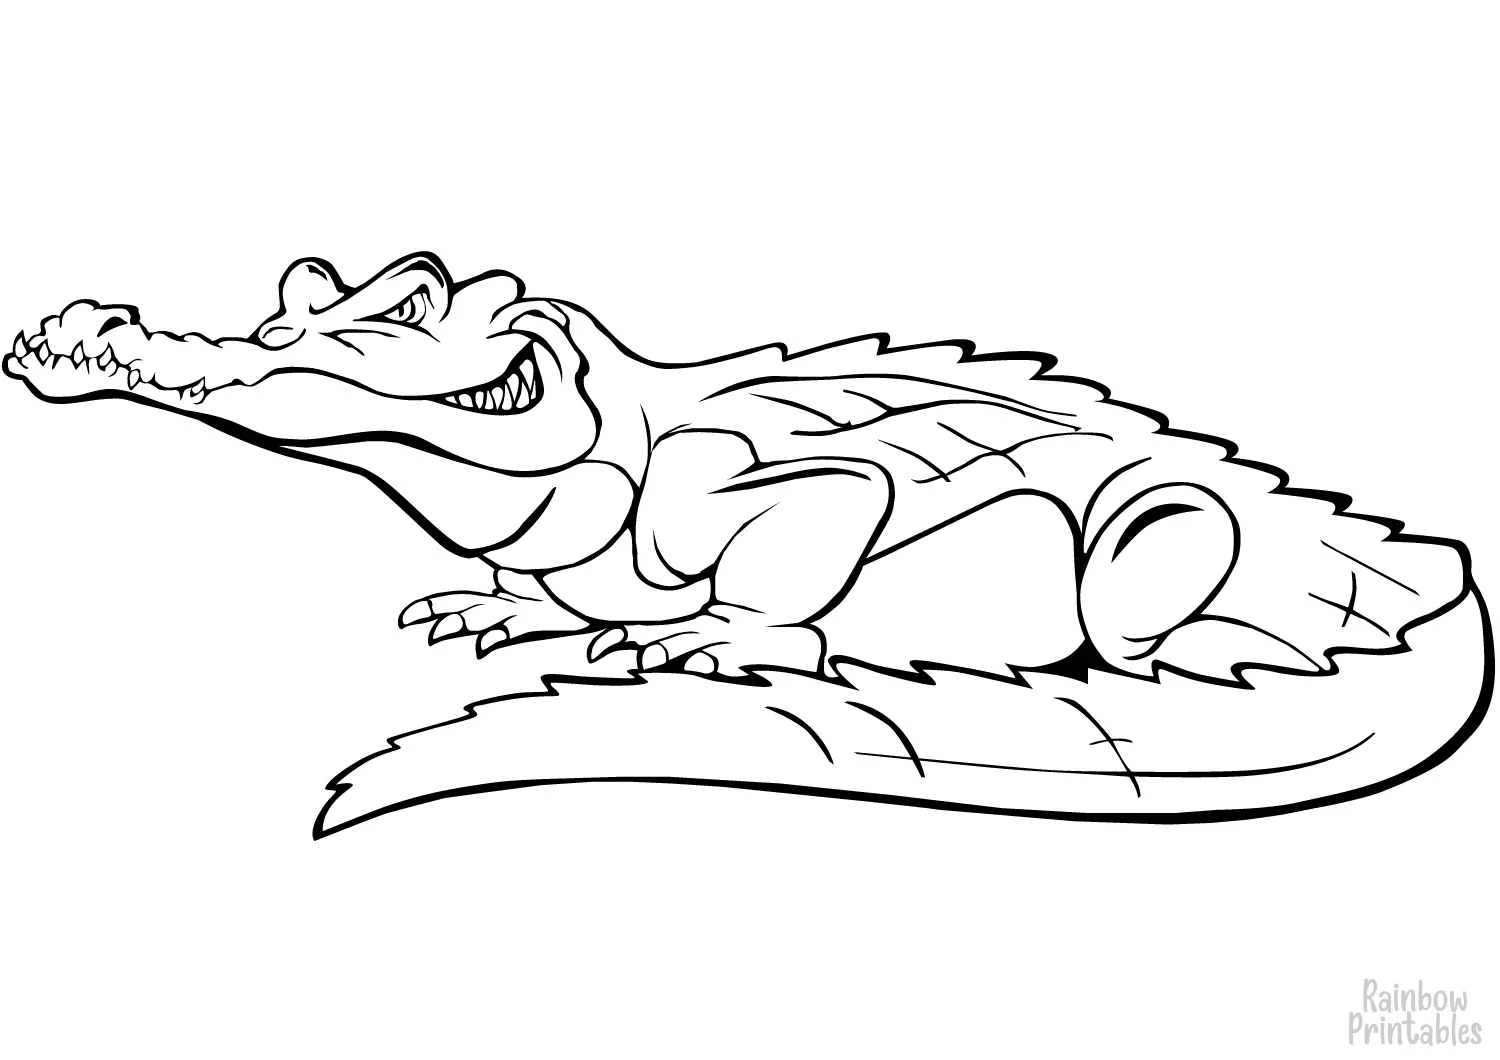 SIMPLE-EASY-line-drawings-ALLIGATOR-CROCODILE-cartoon-coloring-page-for-kids